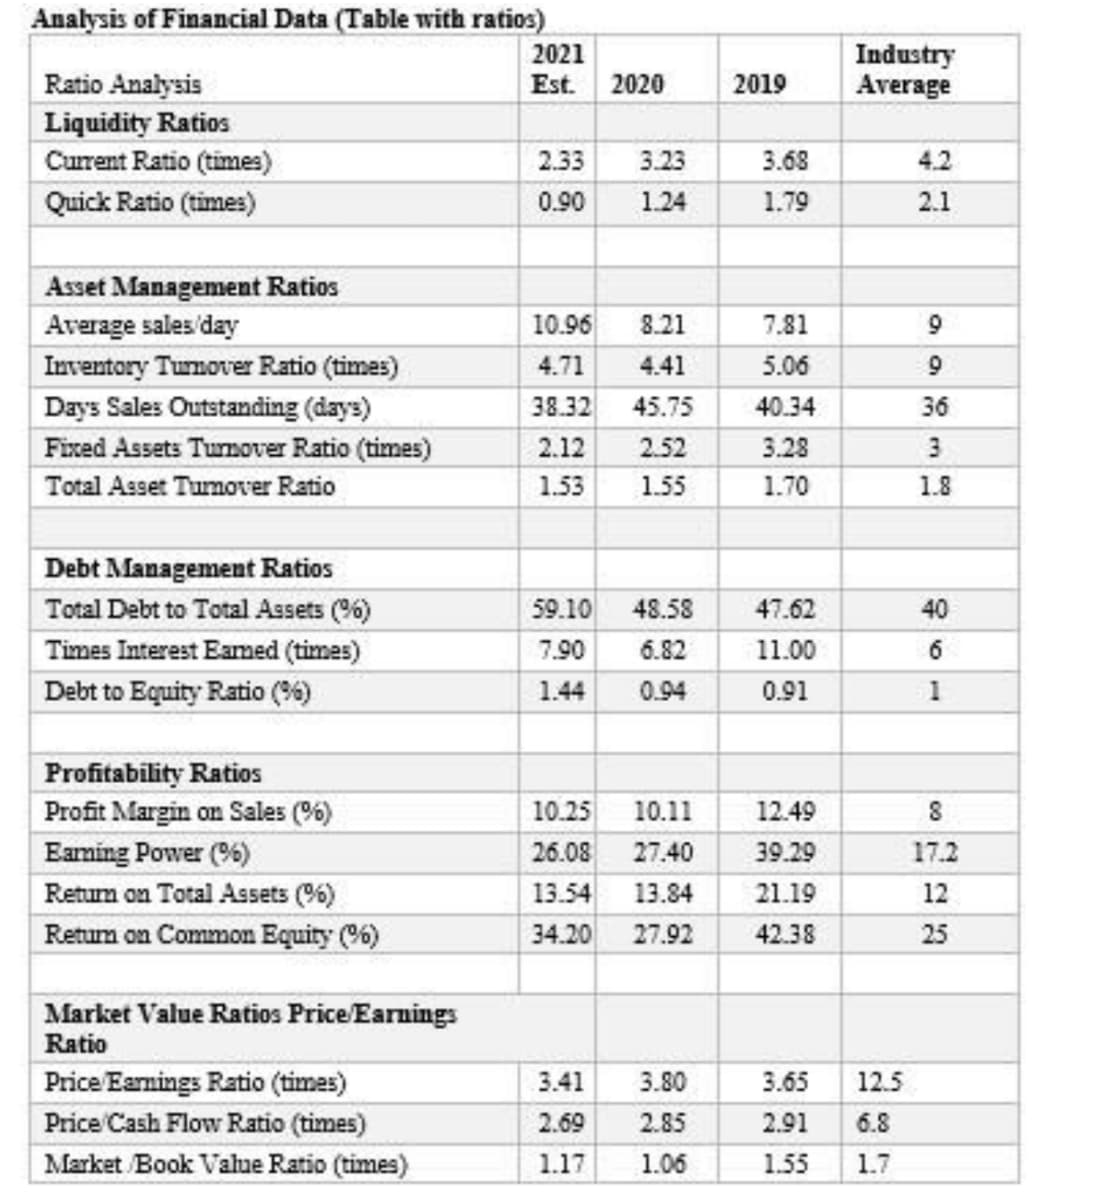 Analysis of Financial Data (Table with ratios)
Industry
Average
2021
2019
Ratio Analysis
Liquidity Ratios
Current Ratio (times)
Est.
2020
2.33
3.23
3.68
4.2
Quick Ratio (times)
0.90
1.24
1.79
2.1
Asset Management Ratios
Average sales day
10.96
8.21
7.81
Inventory Turnover Ratio (times)
4.71
4.41
5.06
9
Days Sales Outstanding (days)
38.32
45.75
40.34
36
2.52
3.28
Fixed Assets Turnover Ratio (times)
Total Asset Tumover Ratio
2.12
3
1.53
1.55
1.70
1.8
Debt Management Ratios
59.10
Total Debt to Total Assets (%)
Times Interest Eamed (times)
48.58
47.62
40
7.90
6.82
11.00
6
Debt to Equity Ratio (%)
1.44
0.94
0.91
1
Profitability Ratios
Profit Margin on Sales (%)
10.25
10.11
12.49
Eaming Power (%)
Retum on Total Assets (%)
26.08
27.40
39.29
17.2
13.54
13.84
21.19
12
Retum on Common Equity (6)
34.20
27.92
42.38
25
Market Value Ratios Price/Earnings
Ratio
Price Eamings Ratio (times)
3.41
3.80
3.65
12.5
Price Cash Flow Ratio (times)
2.69
2.85
2.91
6.8
Market Book Value Ratio (times)
1.17
1.06
1.55
1.7
